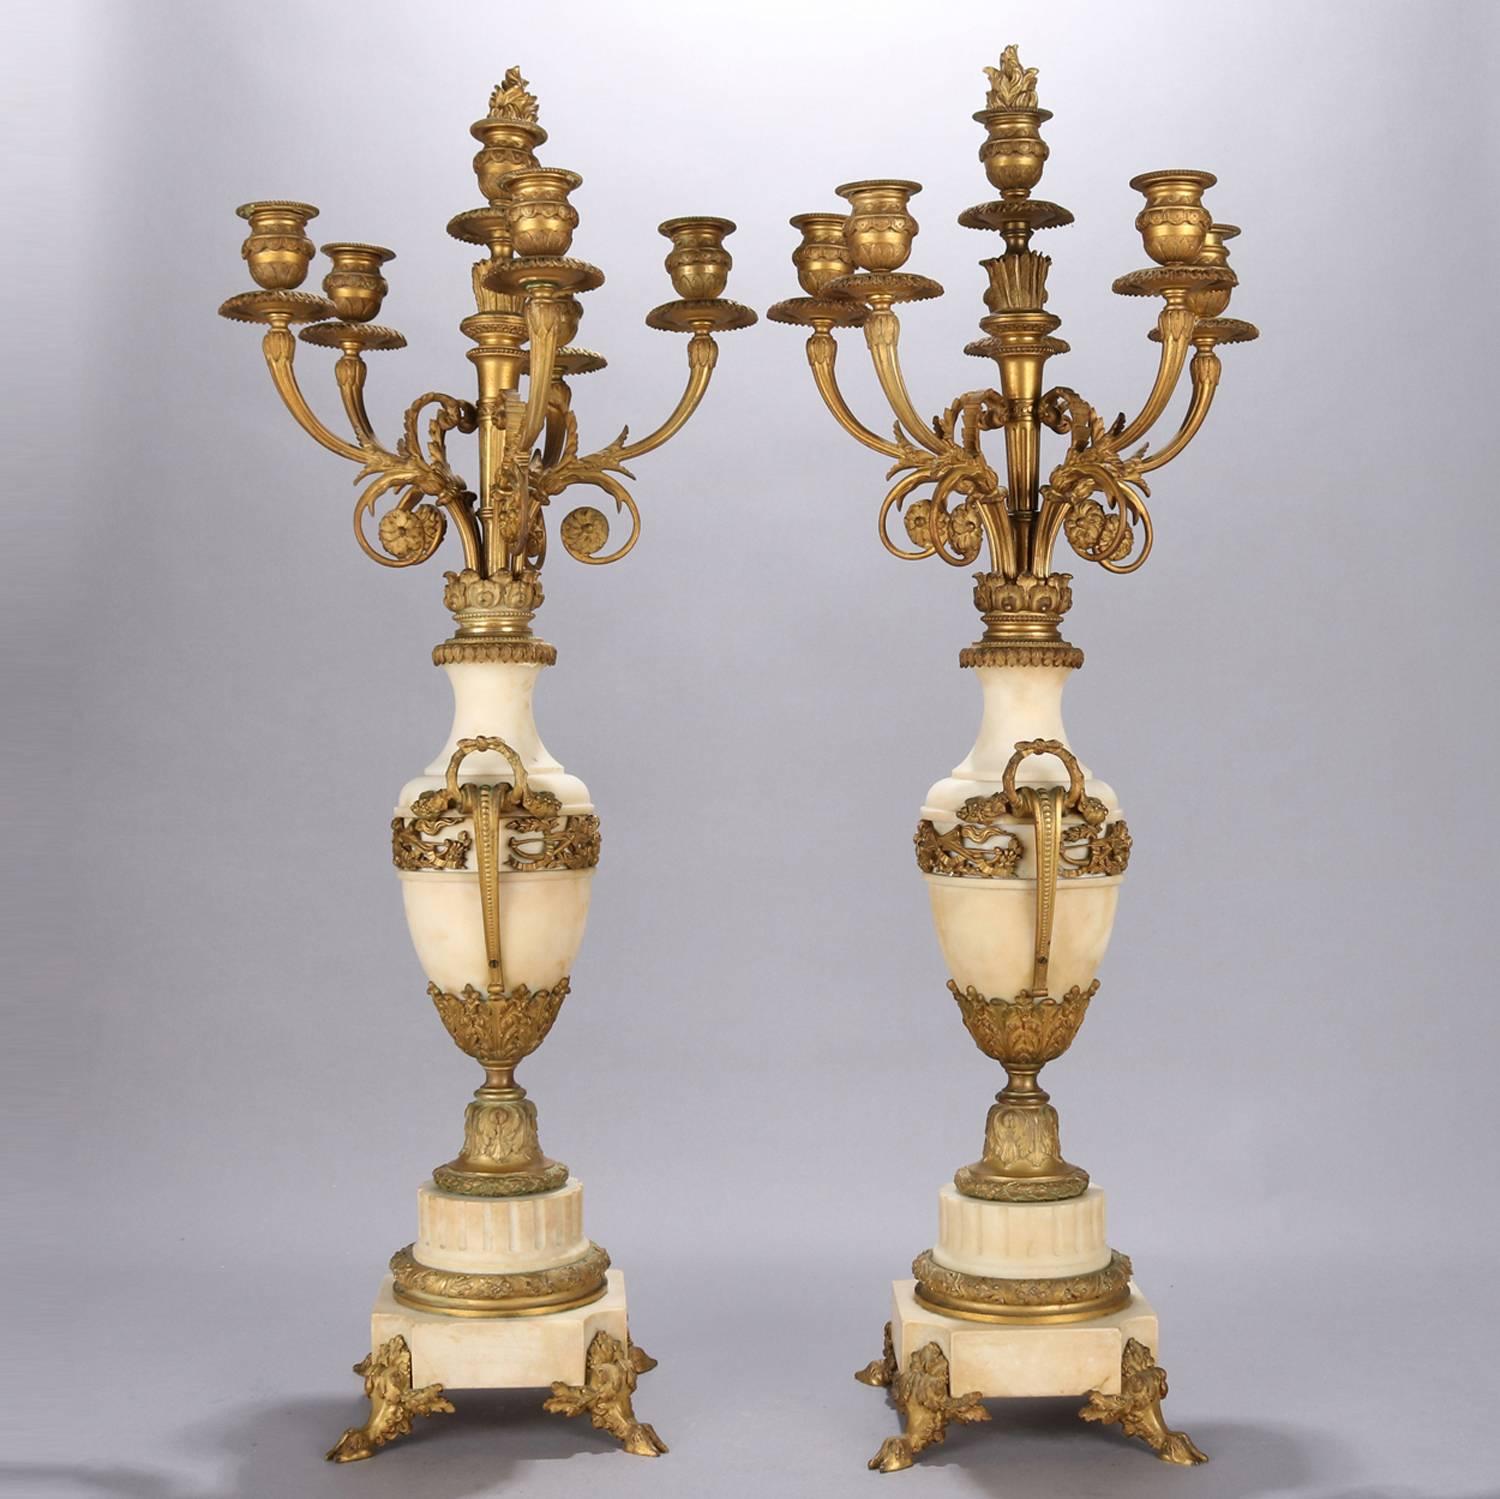 Cast Oversized French Classical Urn Form Marble and Gilt Bronze Candelabras